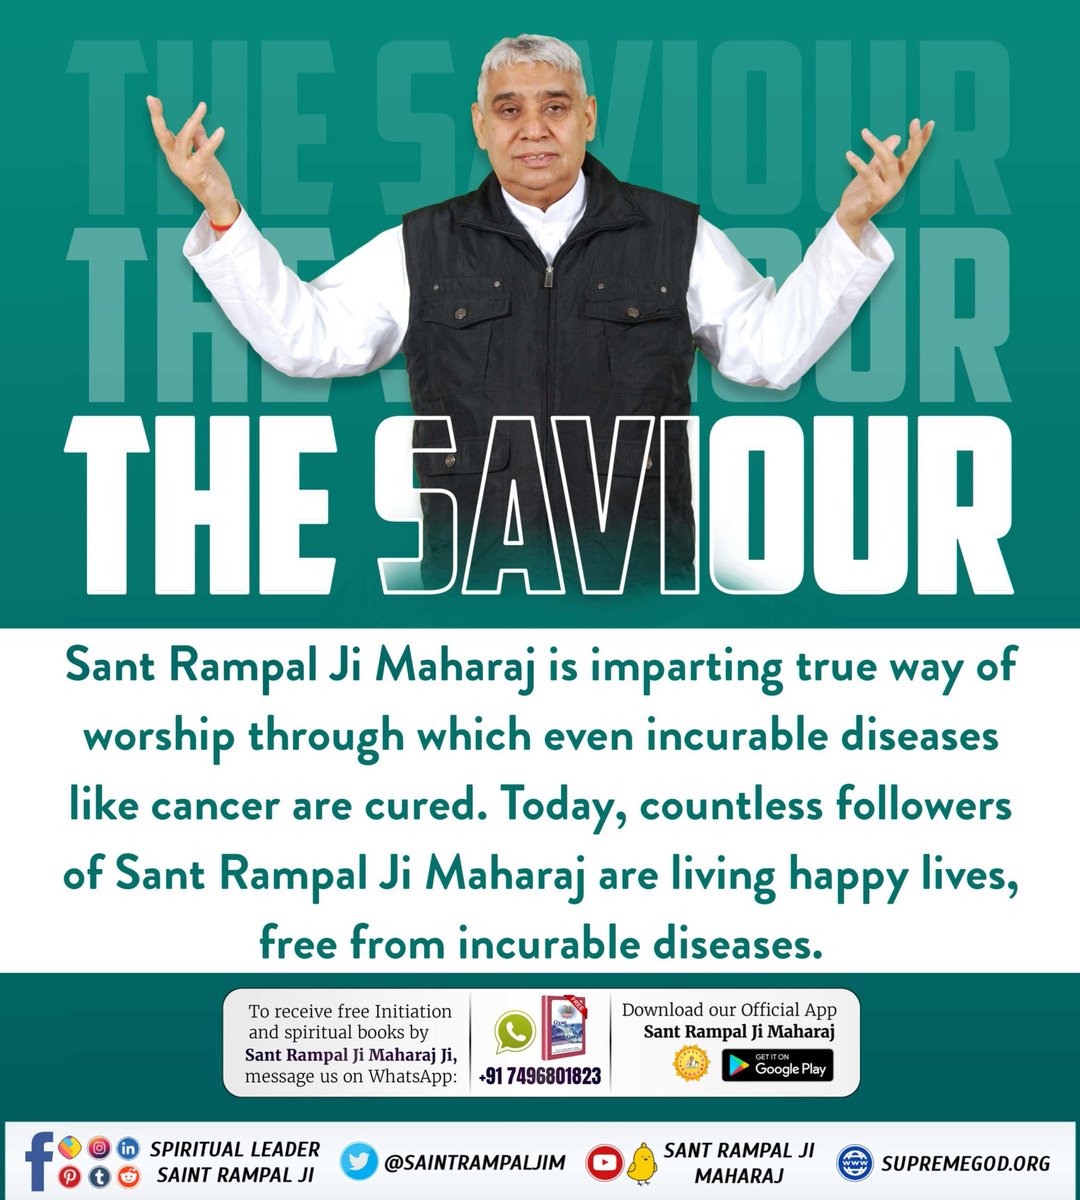 Sant Rampal Ji Maharaj Ji is a true reformer who is working to bring back the golden age of Satyug in Kalyug. He has given the world a new way of life based on truth, non-violence, and simplicity. #जगत_उद्धारक_संत_रामपालजी Saviour of The World #GodMorningThursday